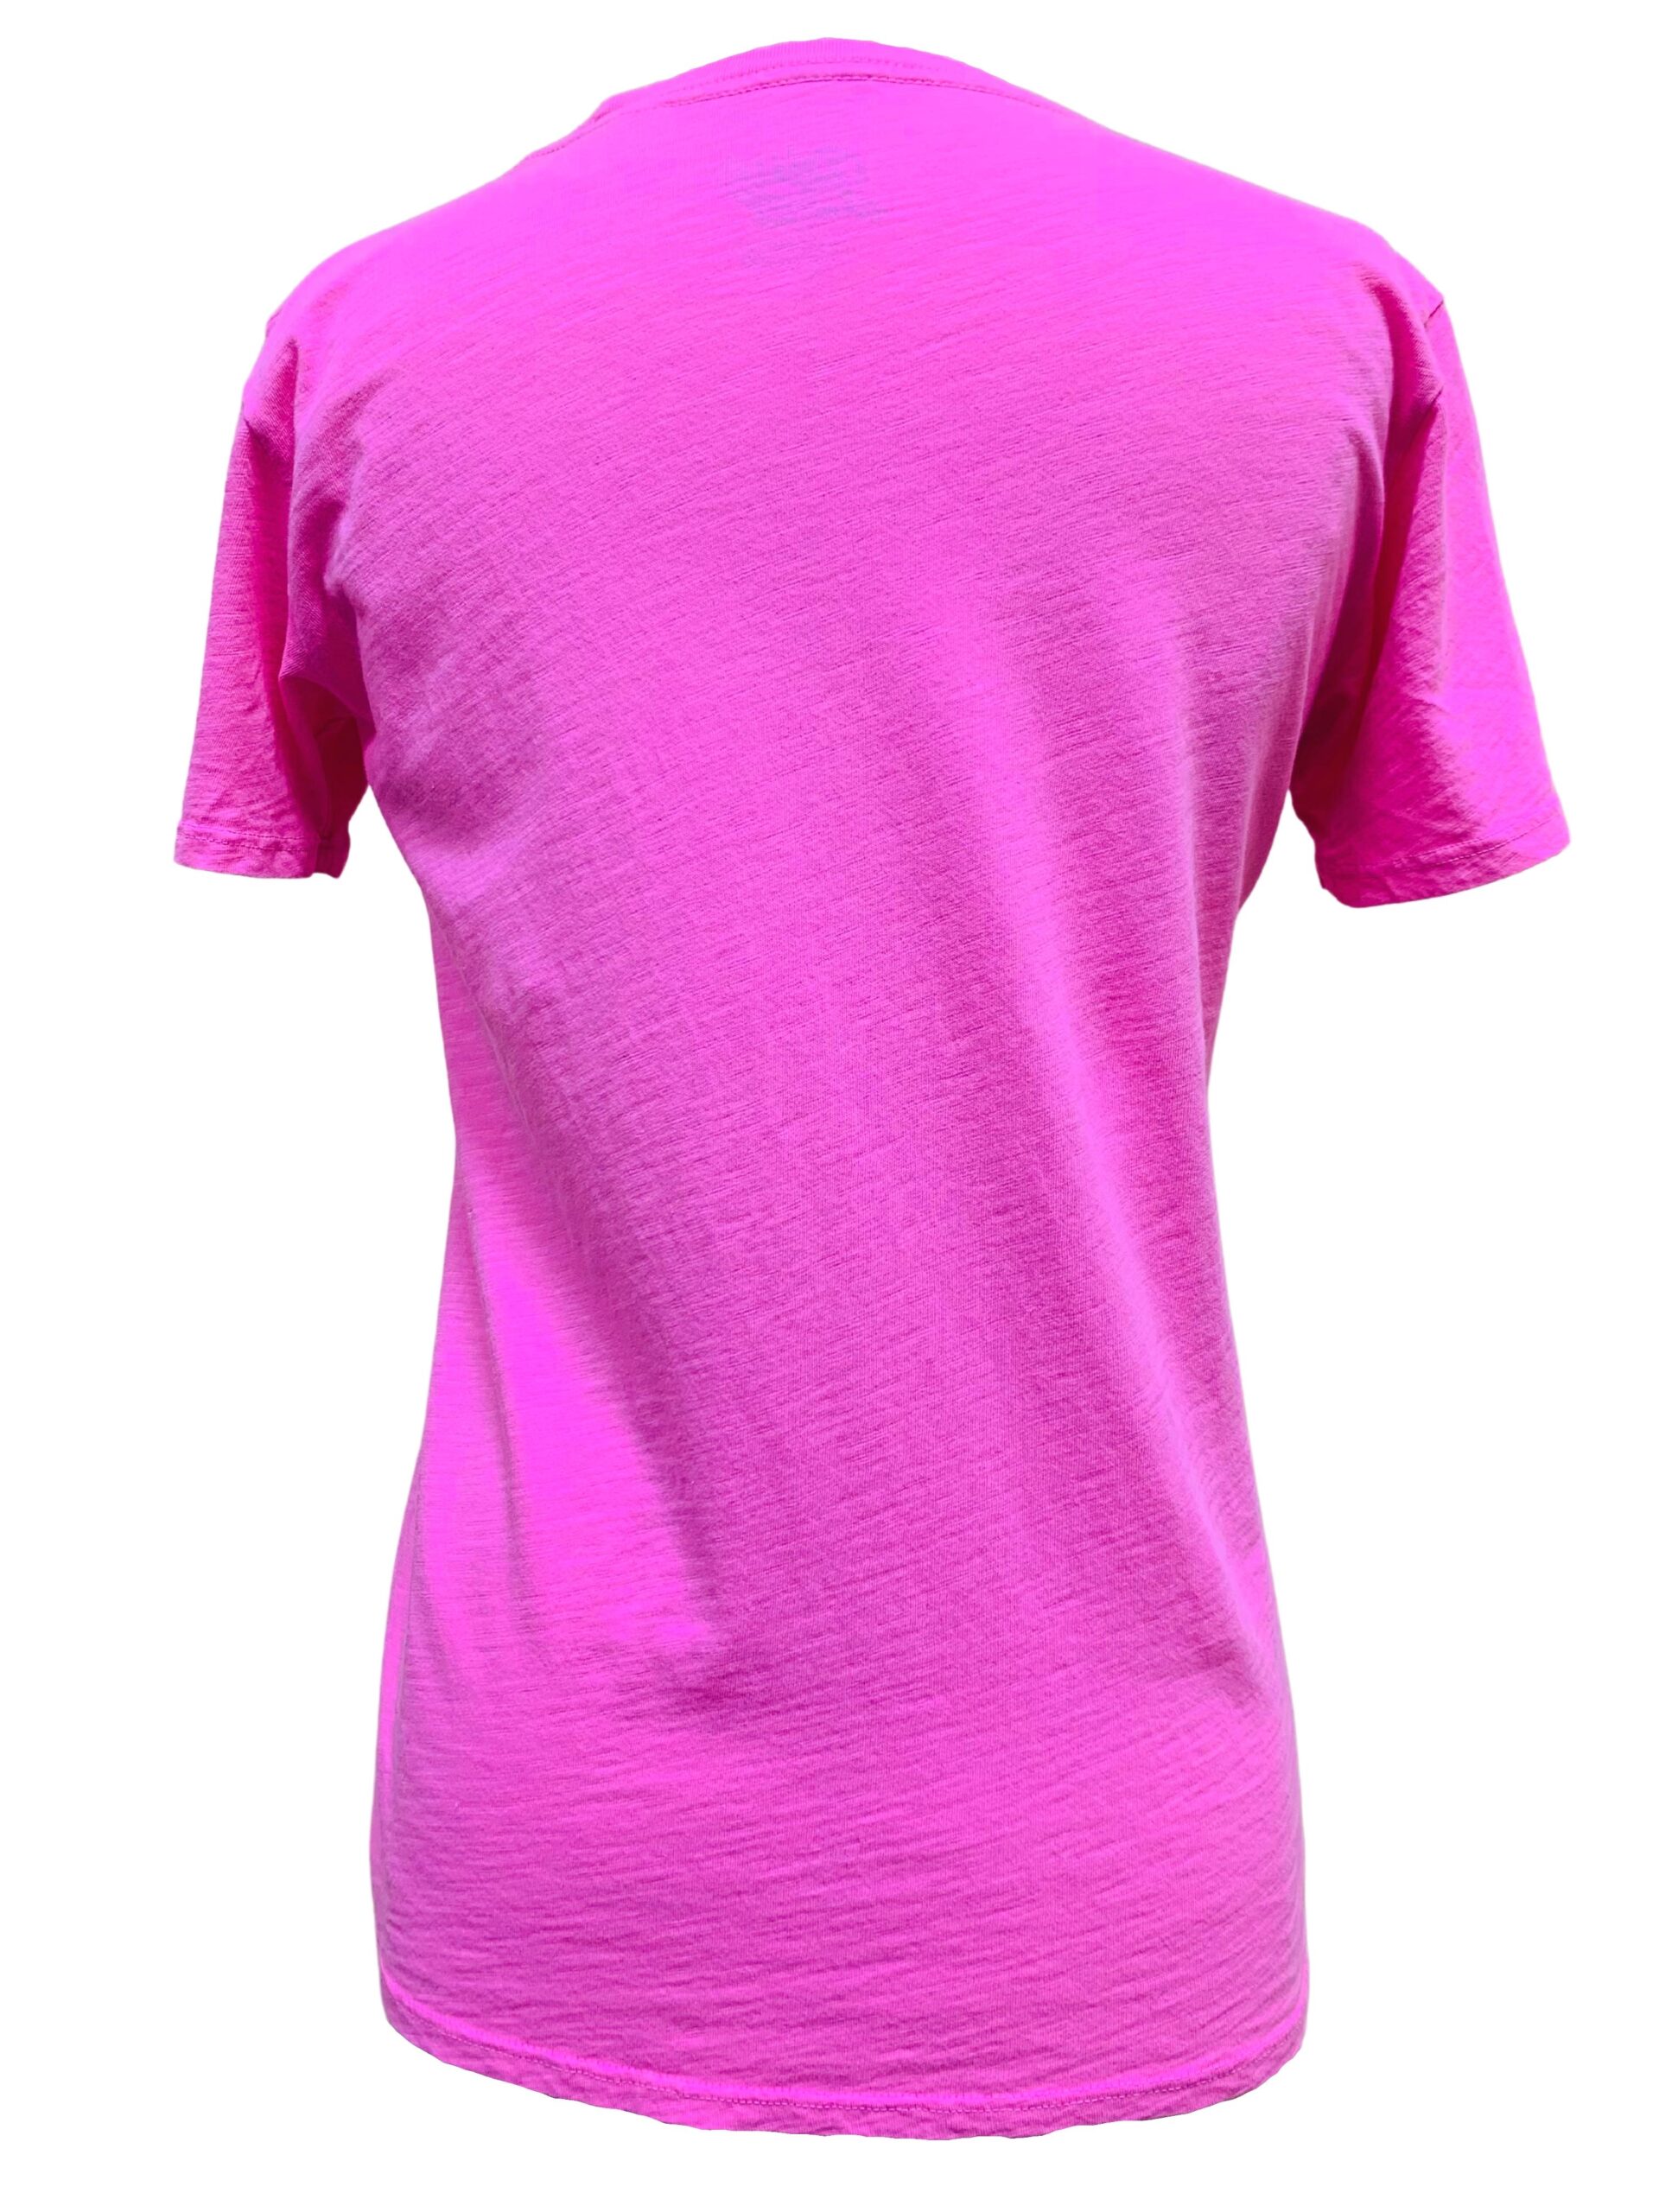 Classic CJ Palm Tee Pink - Coconut Jack's Waterfront Grille